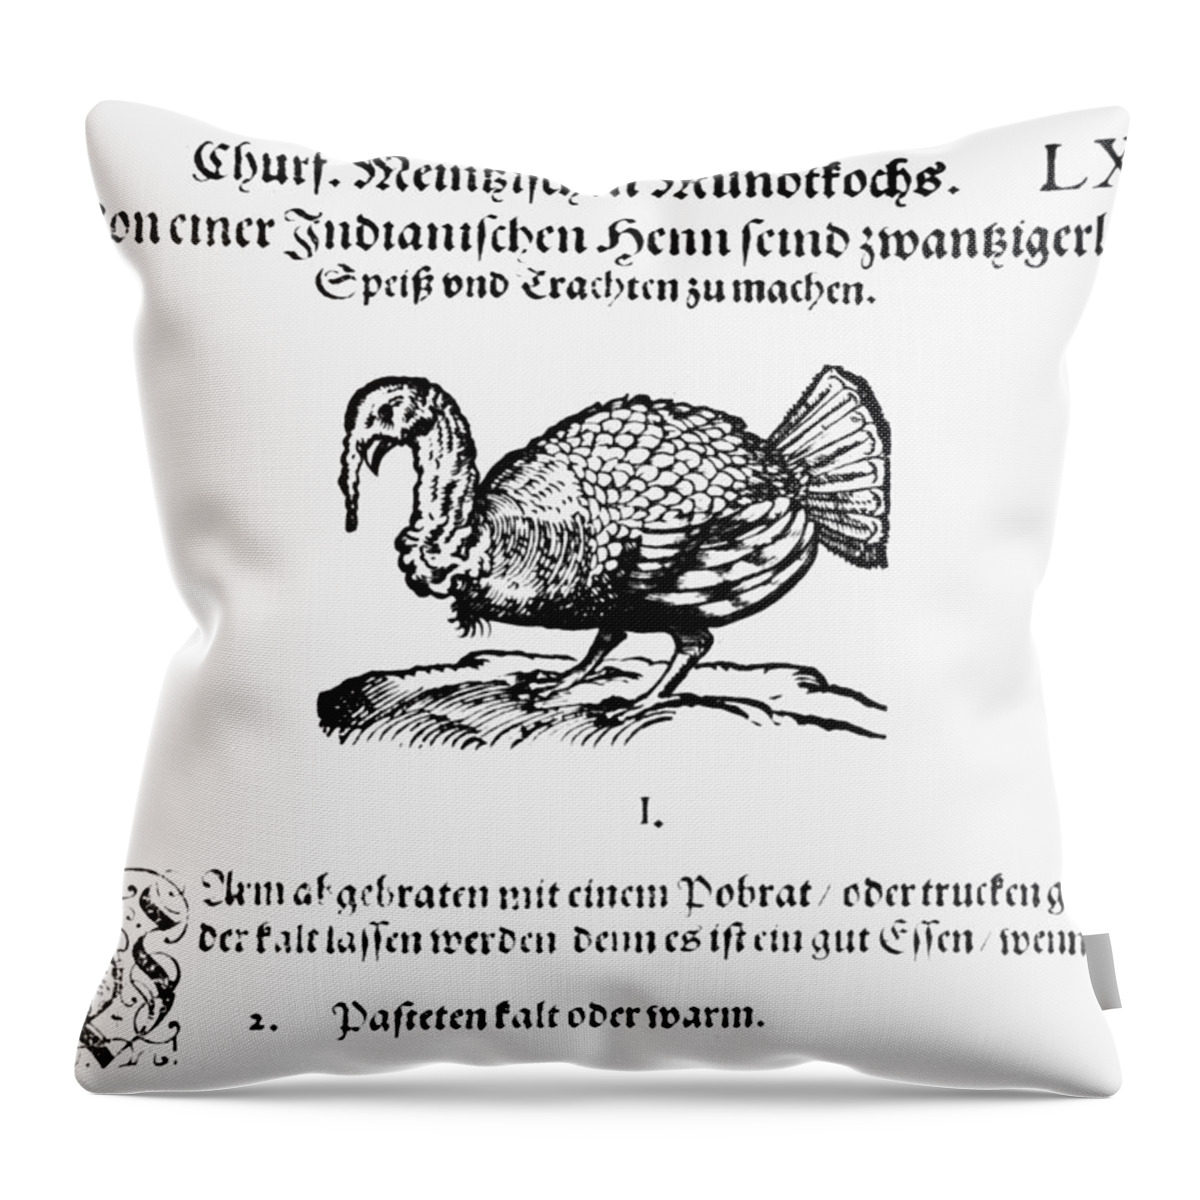 1604 Throw Pillow featuring the photograph Wild Turkey, 1604 by Granger